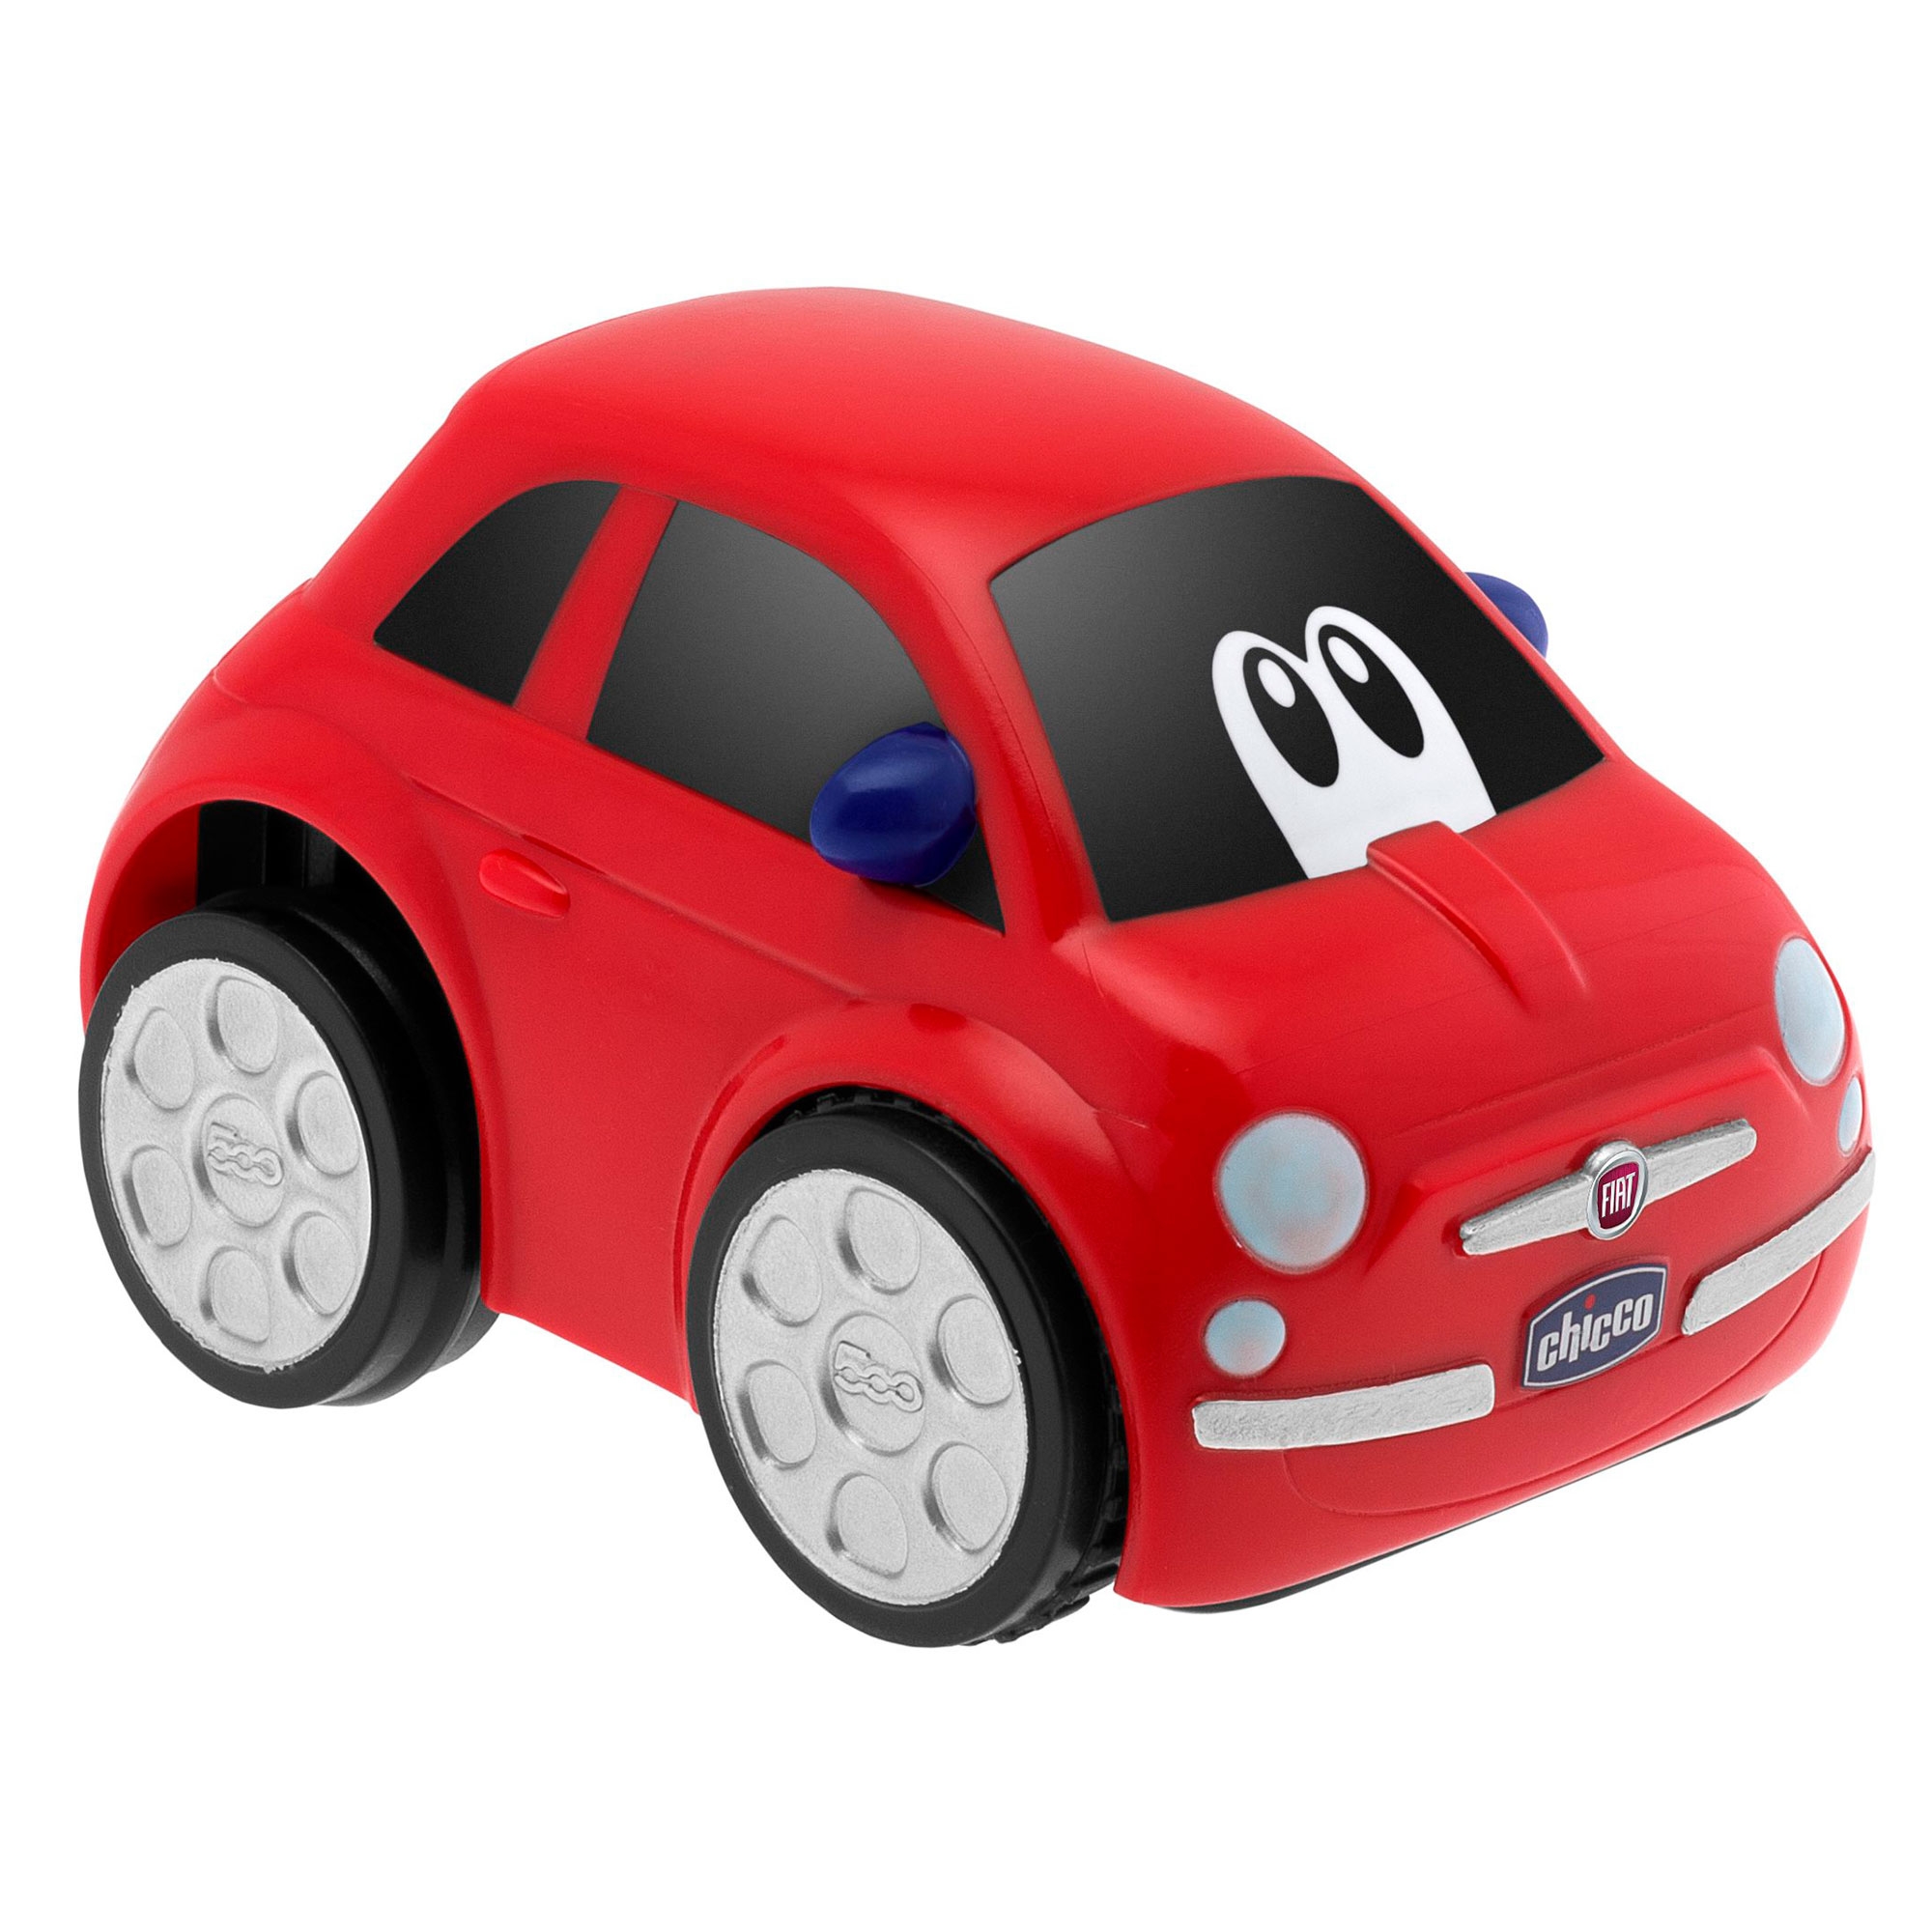 Chicco Fiat 500 Turbo Touch Baby / Child / Toddler Play Toy Car ...